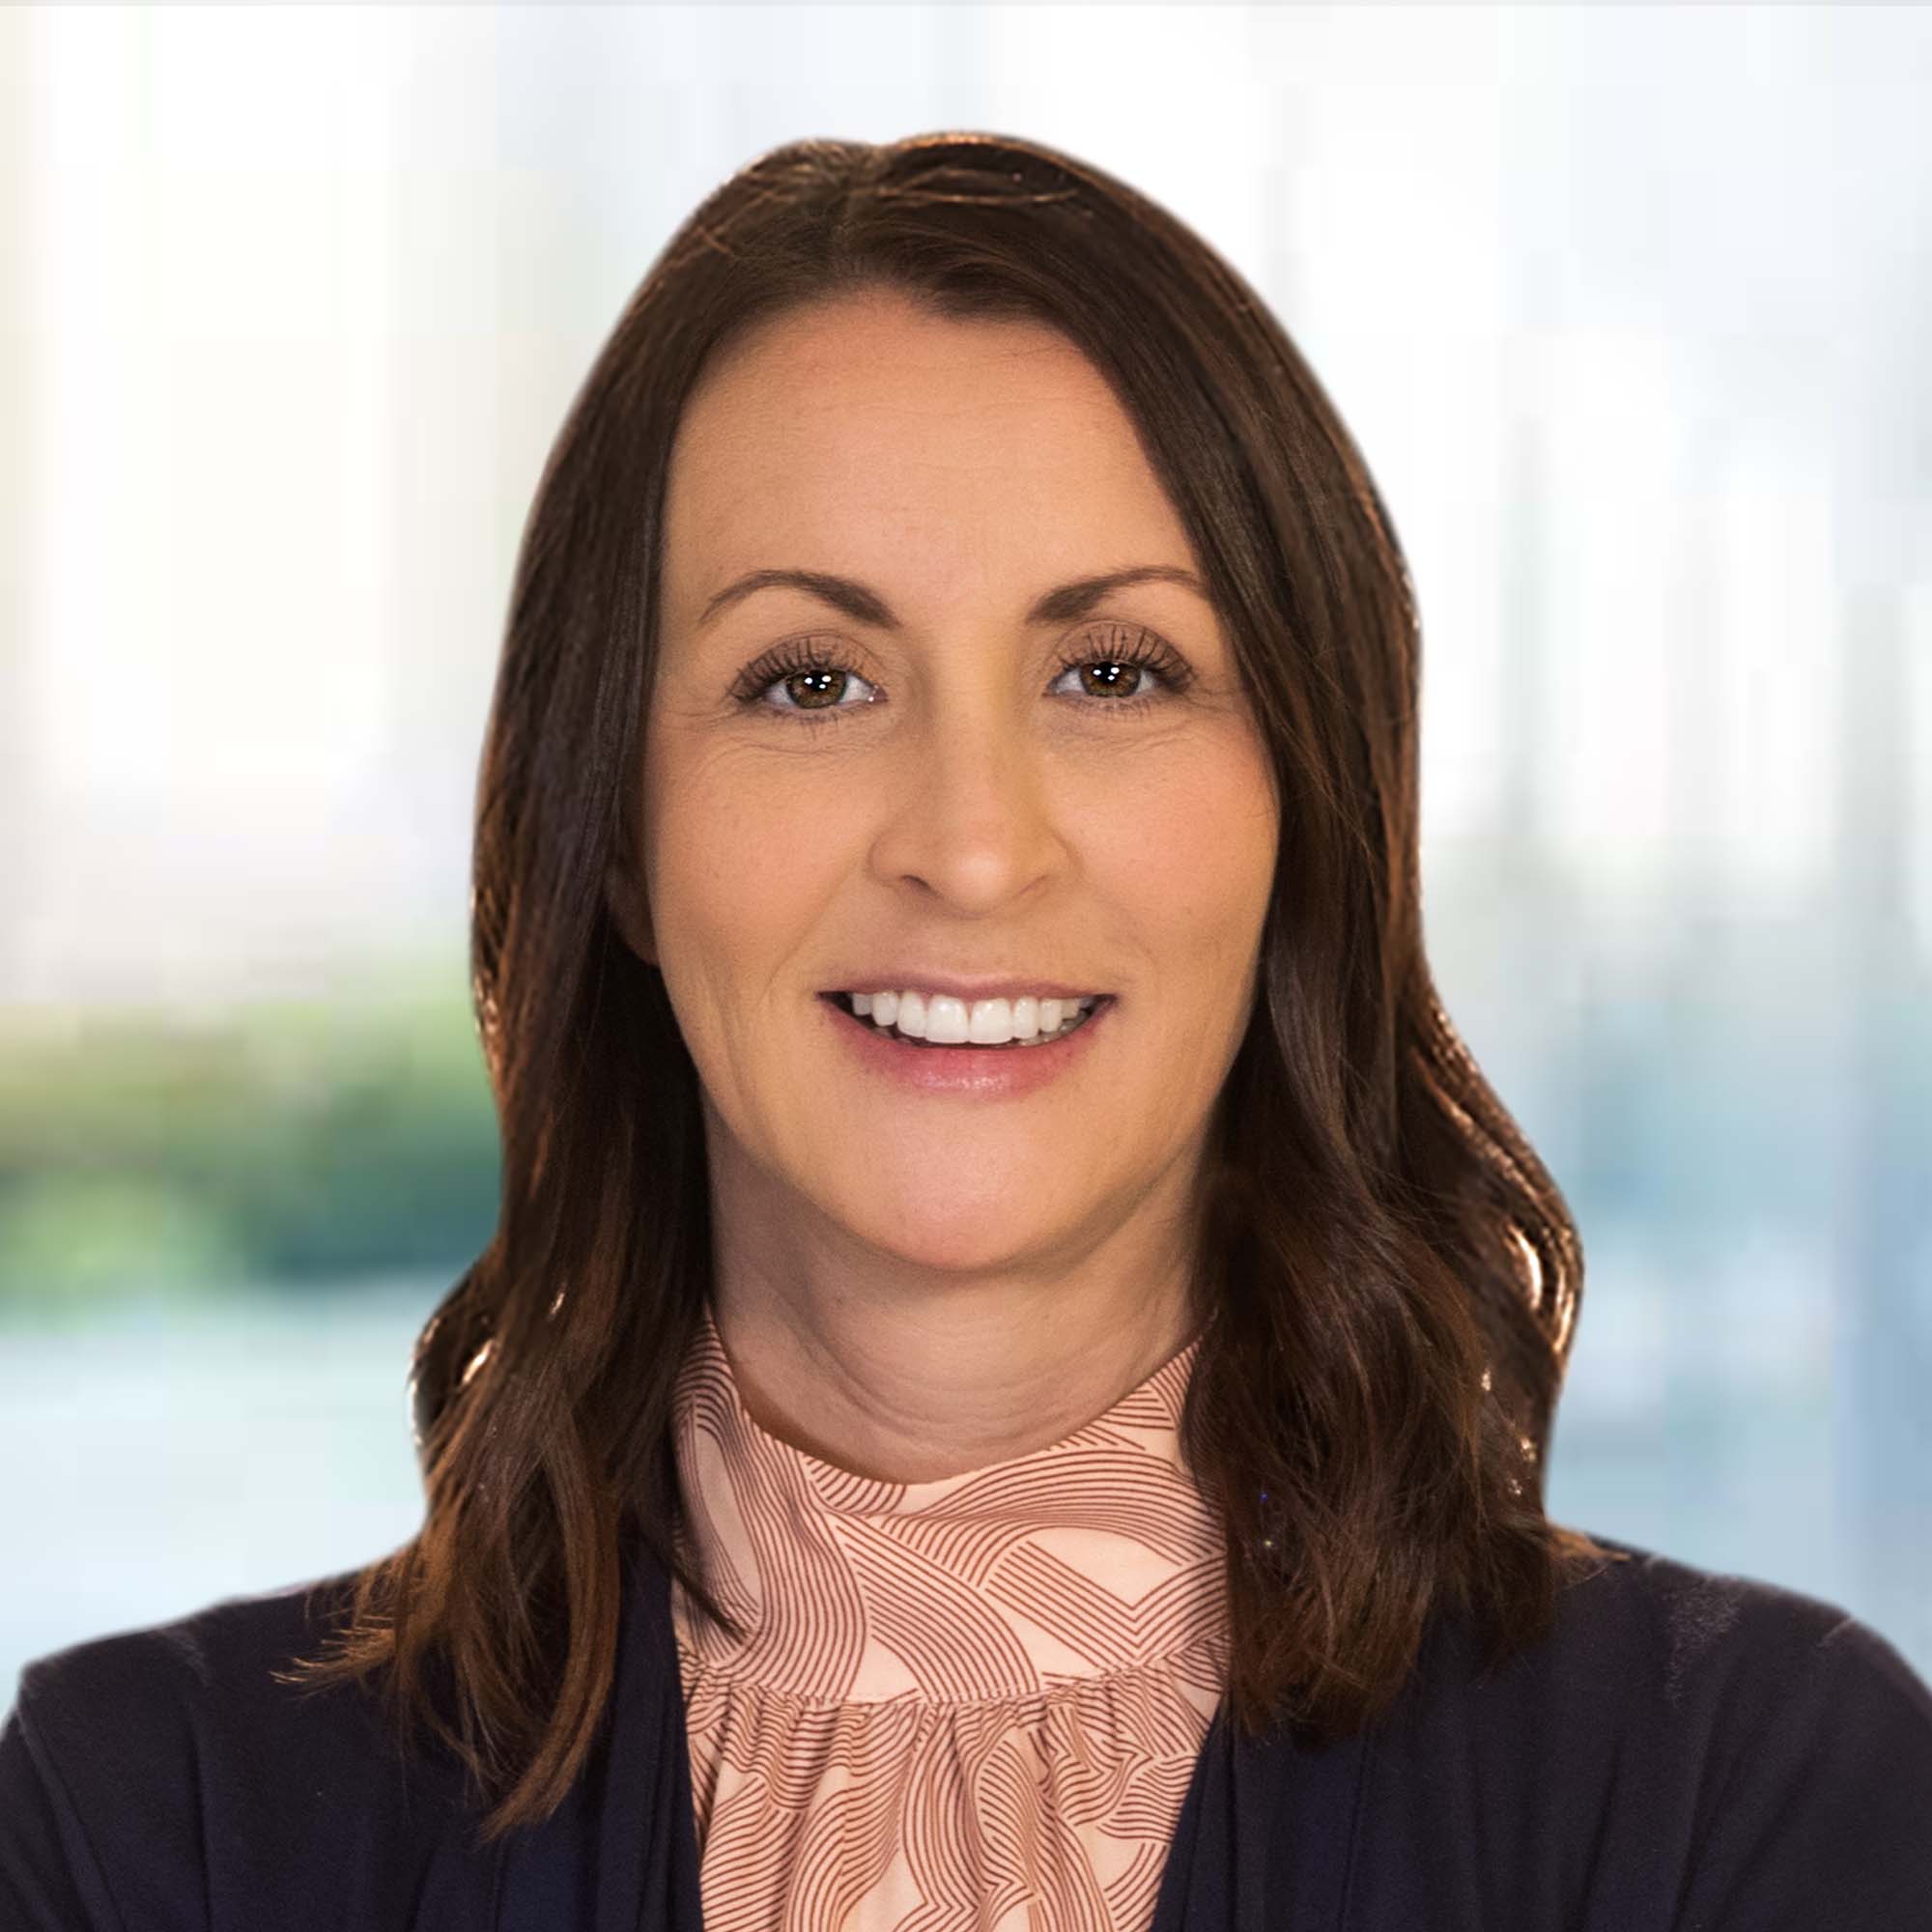 Chartway is honored to announce that Lara Shields, after having participated the credit union’s associate director development program, has been appointed to its board of directors.